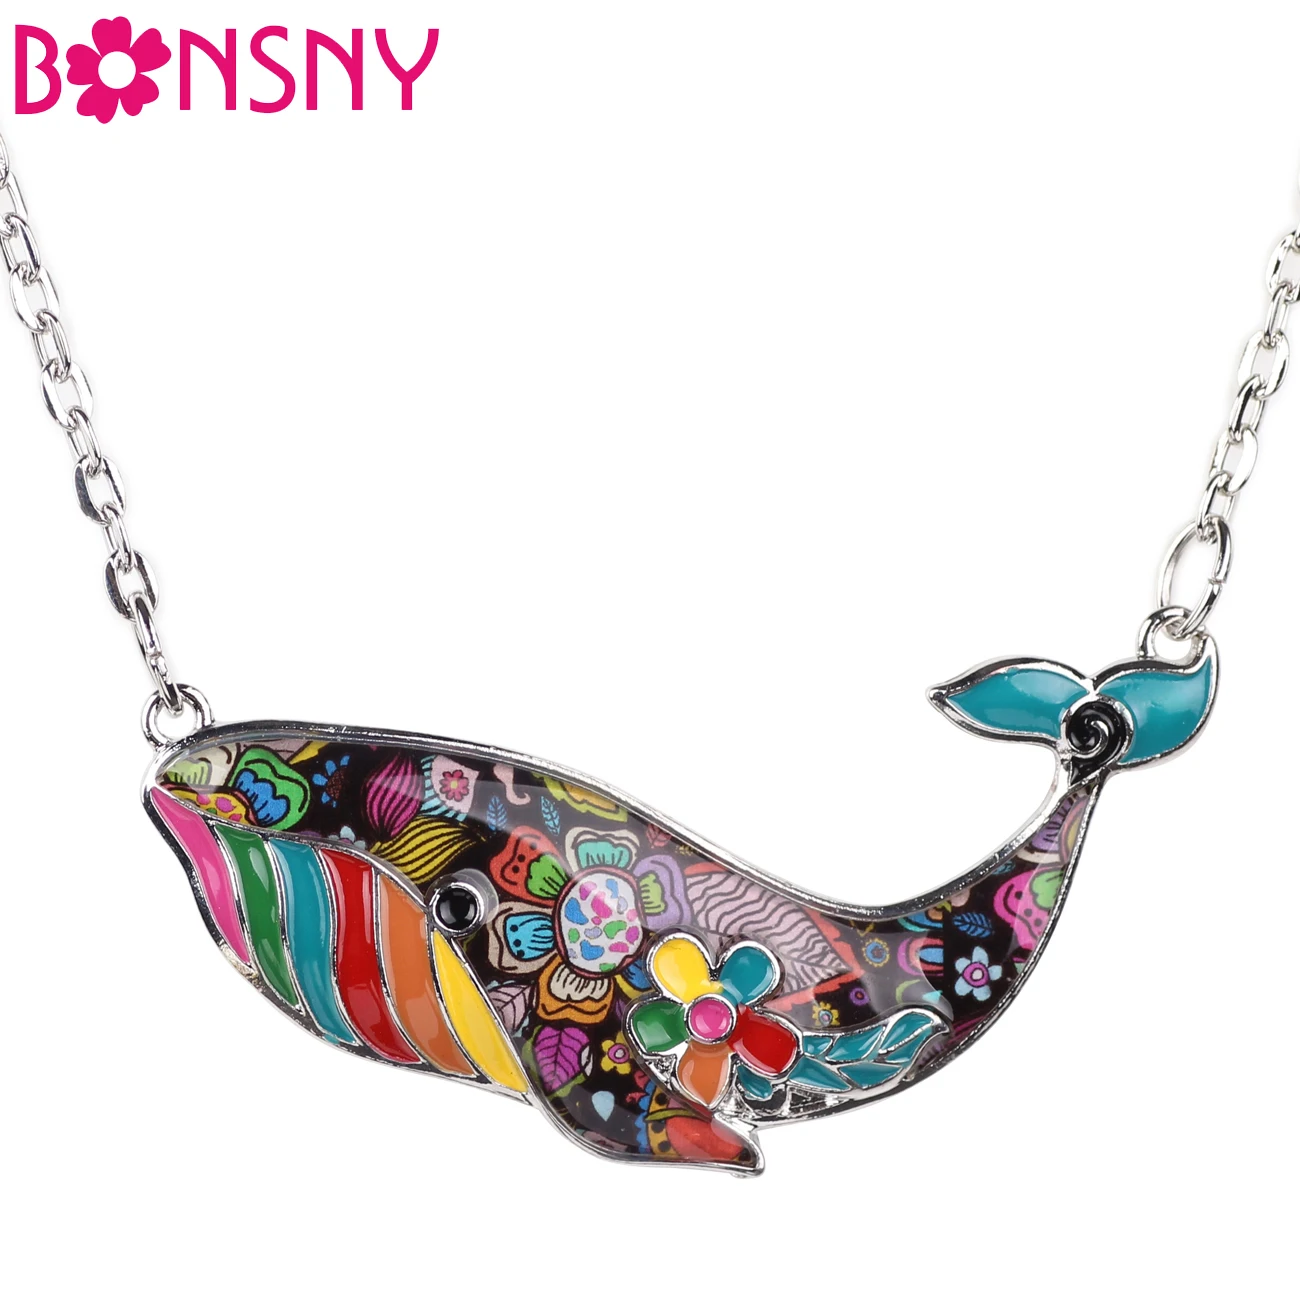 

Bonsny Statement Alloy Enamel Whale Necklace Pendant Chain Collar Choker Ocean Animal Novelty Jewelry For Women Girls Gift Party